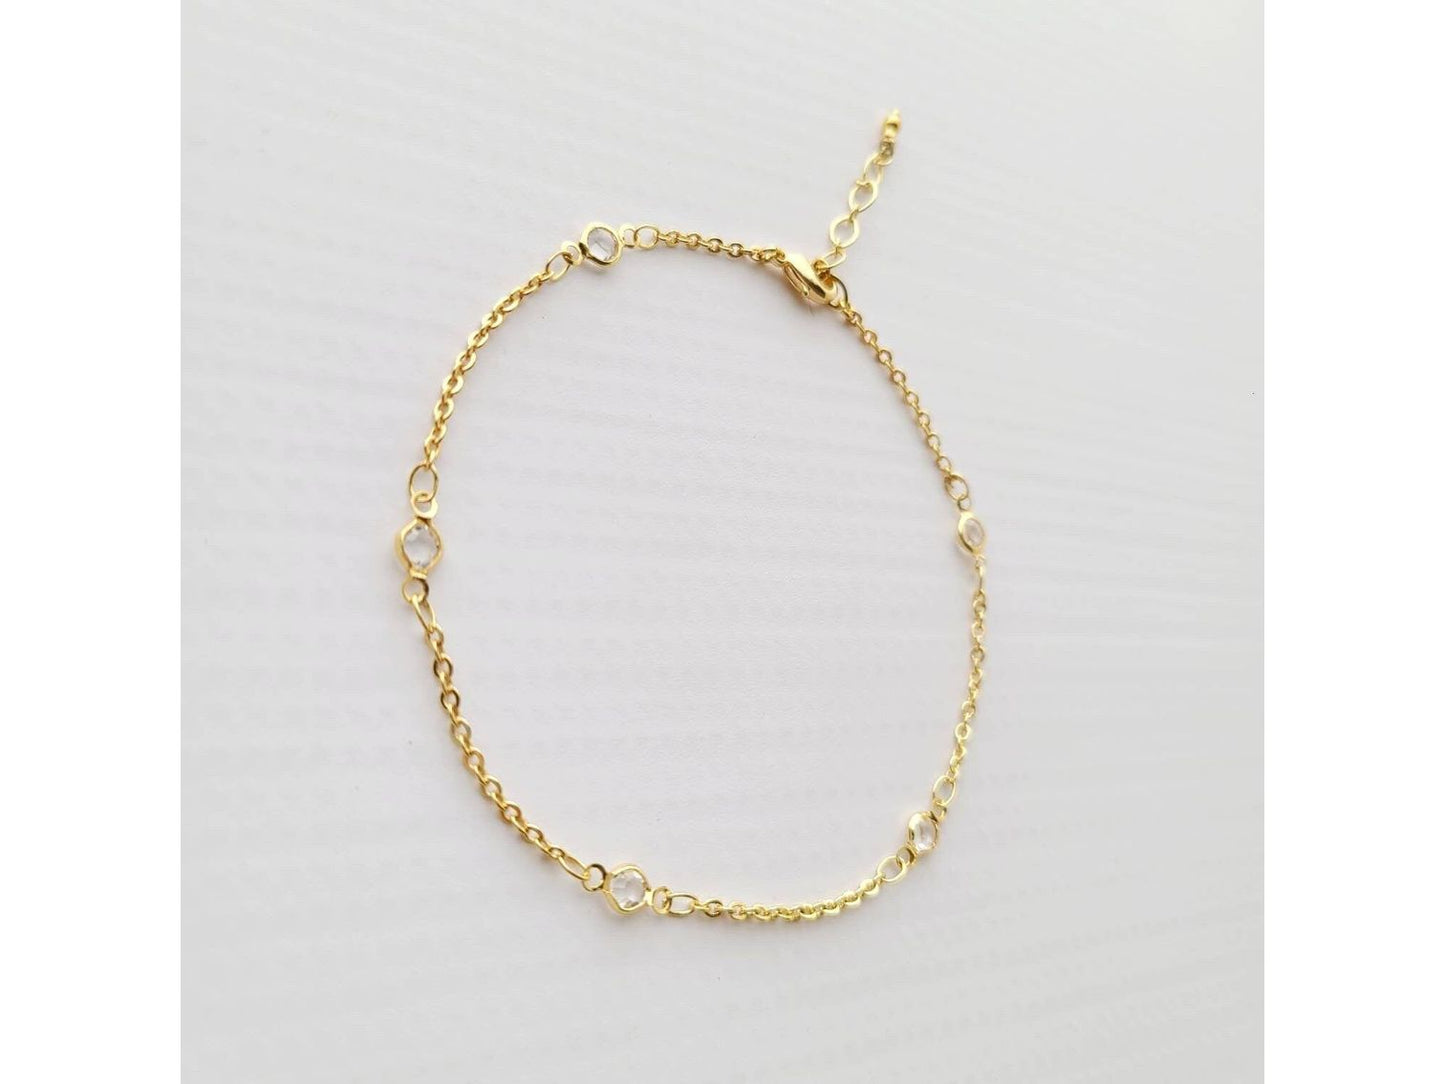 Crystal stations Gold adjustable Anklet, 9 inches with 2 inches extender